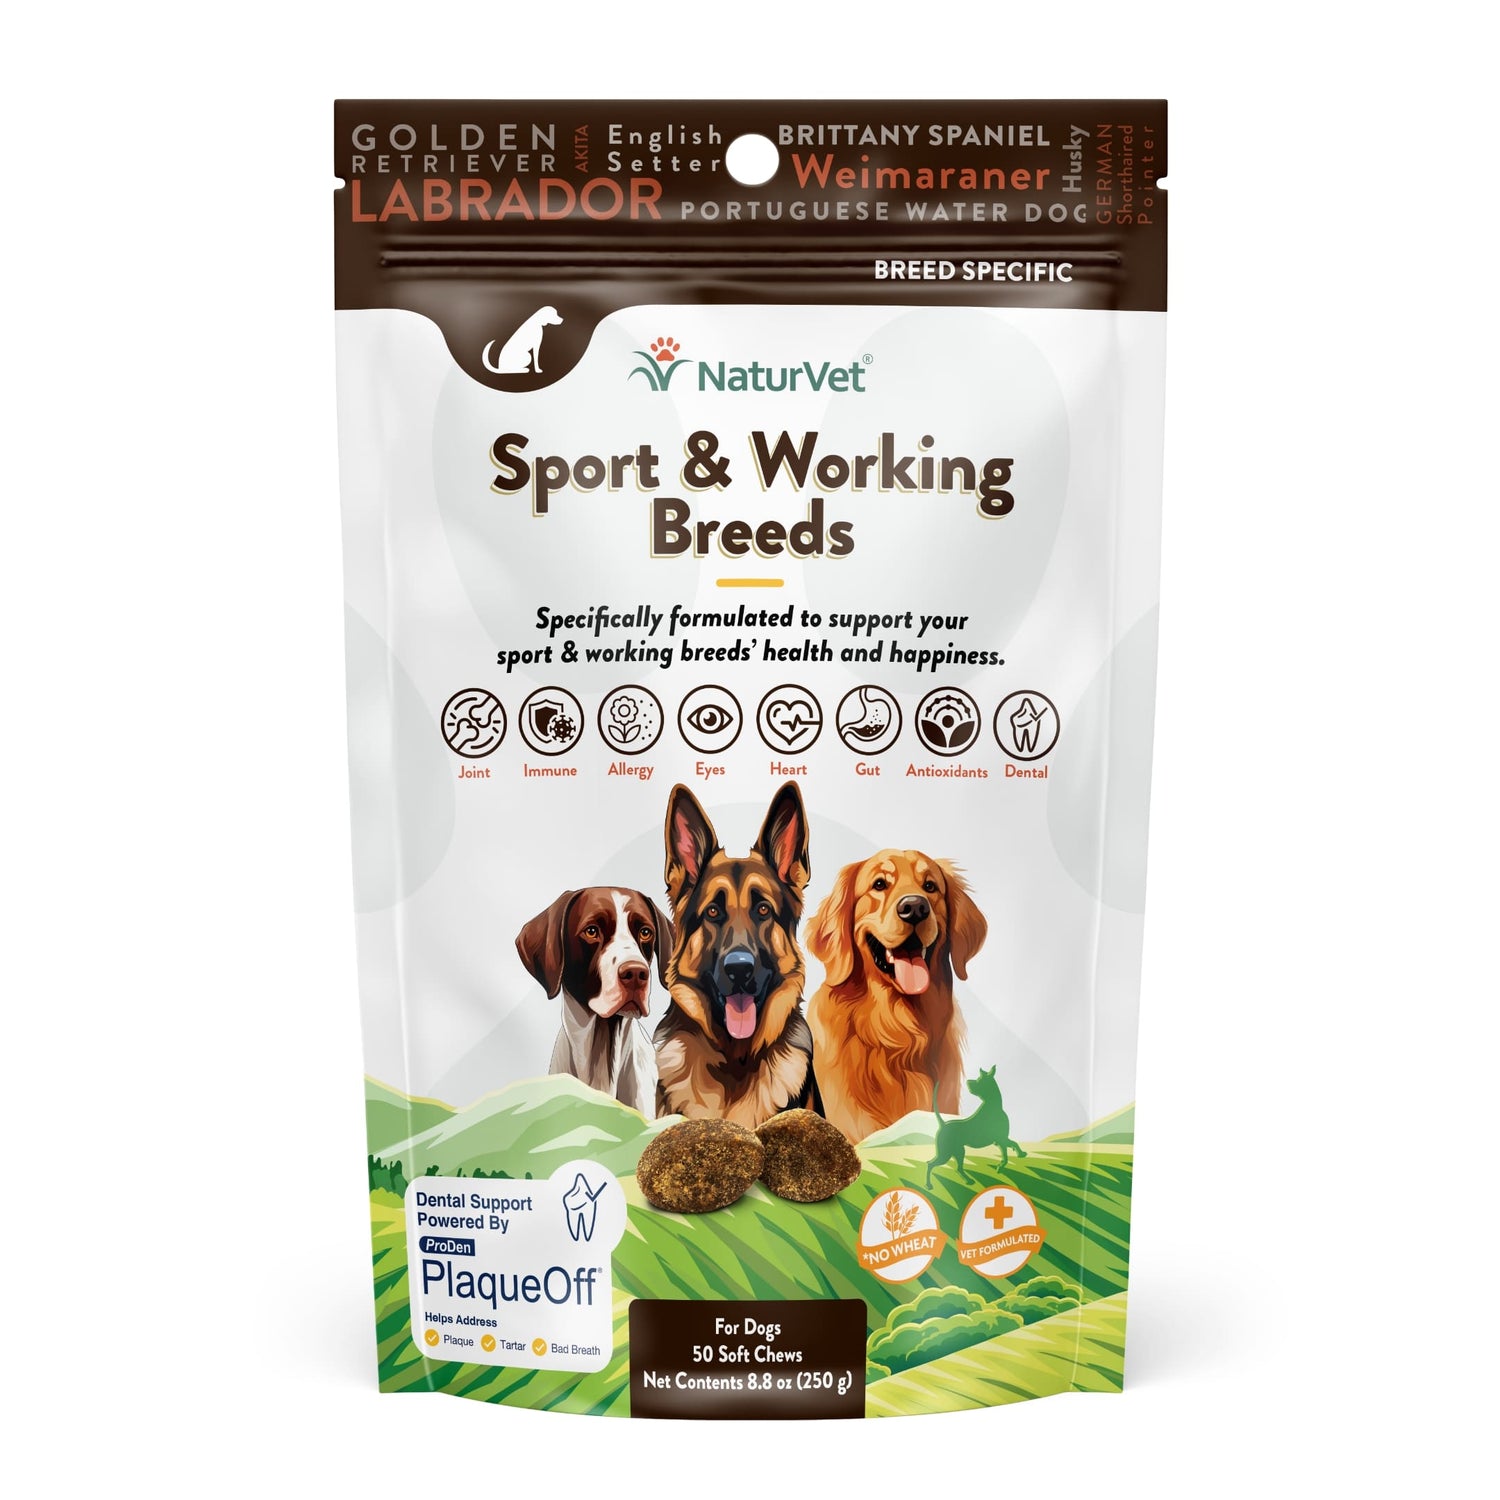 Breed Specific Soft Chews for Simplified Support